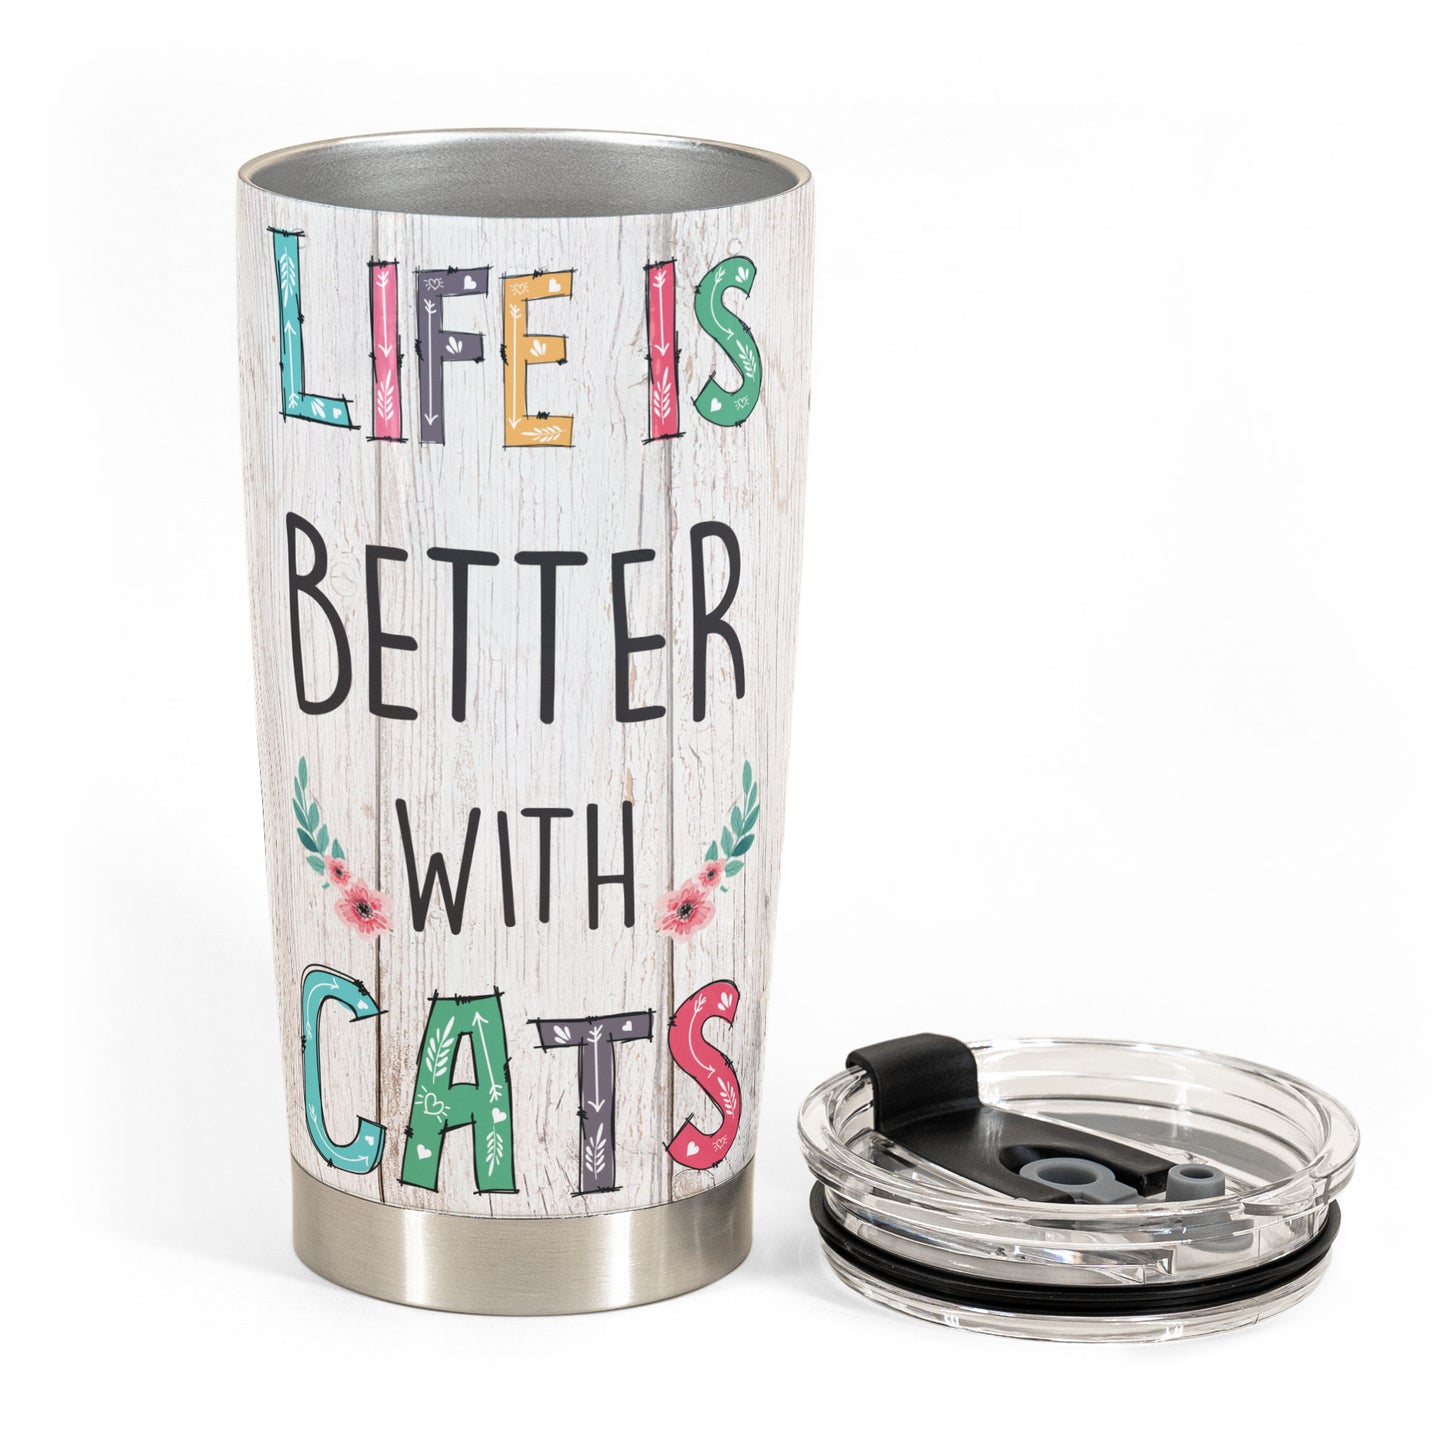 Life Is Better With Cats - Personalized Tumbler Cup - Gift For Cat Mom - Lying Girl & Peeking Cats